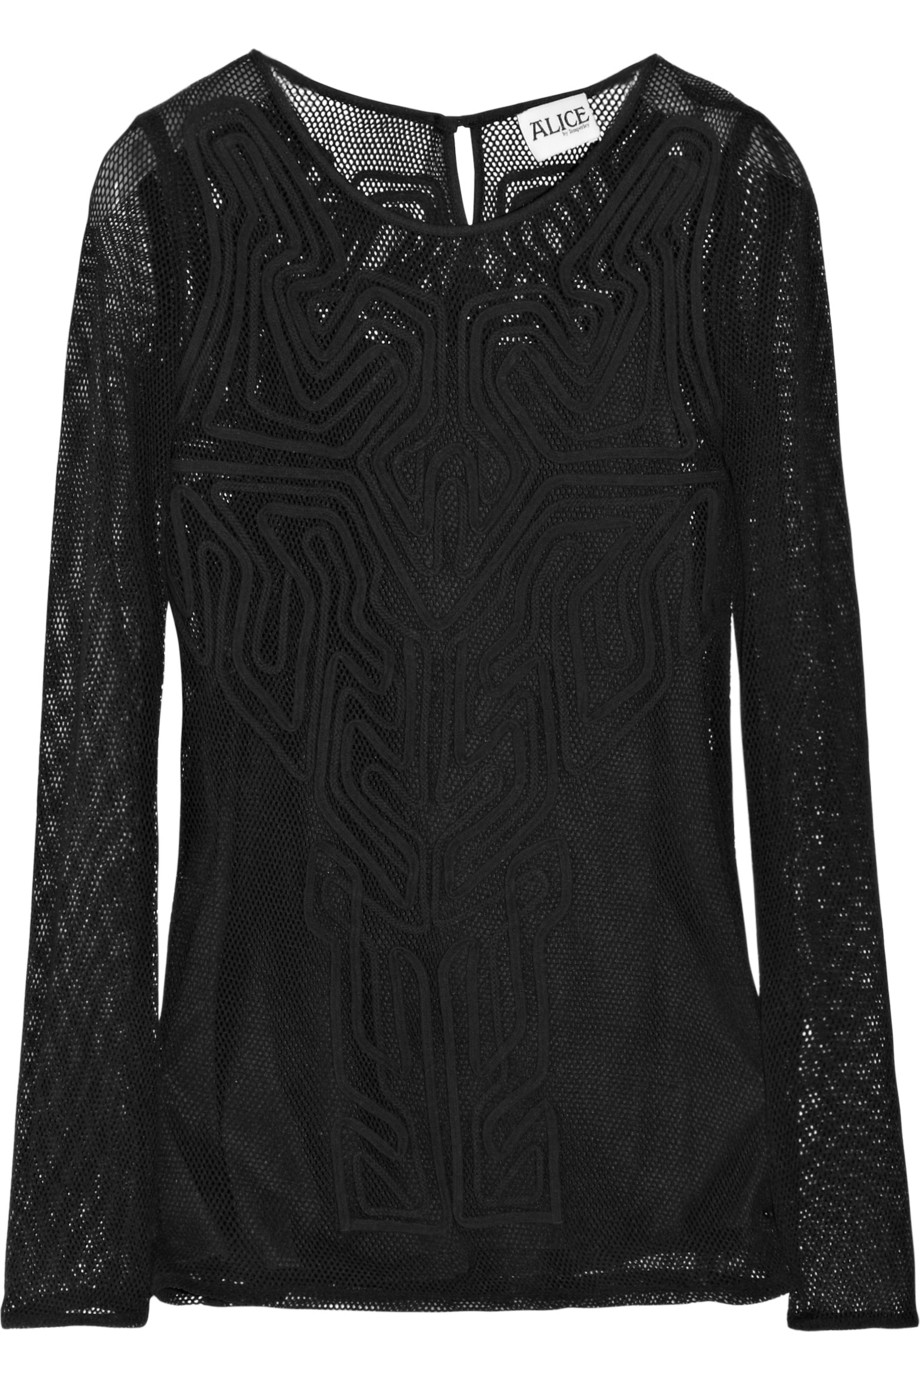 Lyst - Alice by temperley Tijuana Embroidered Mesh Top in Black